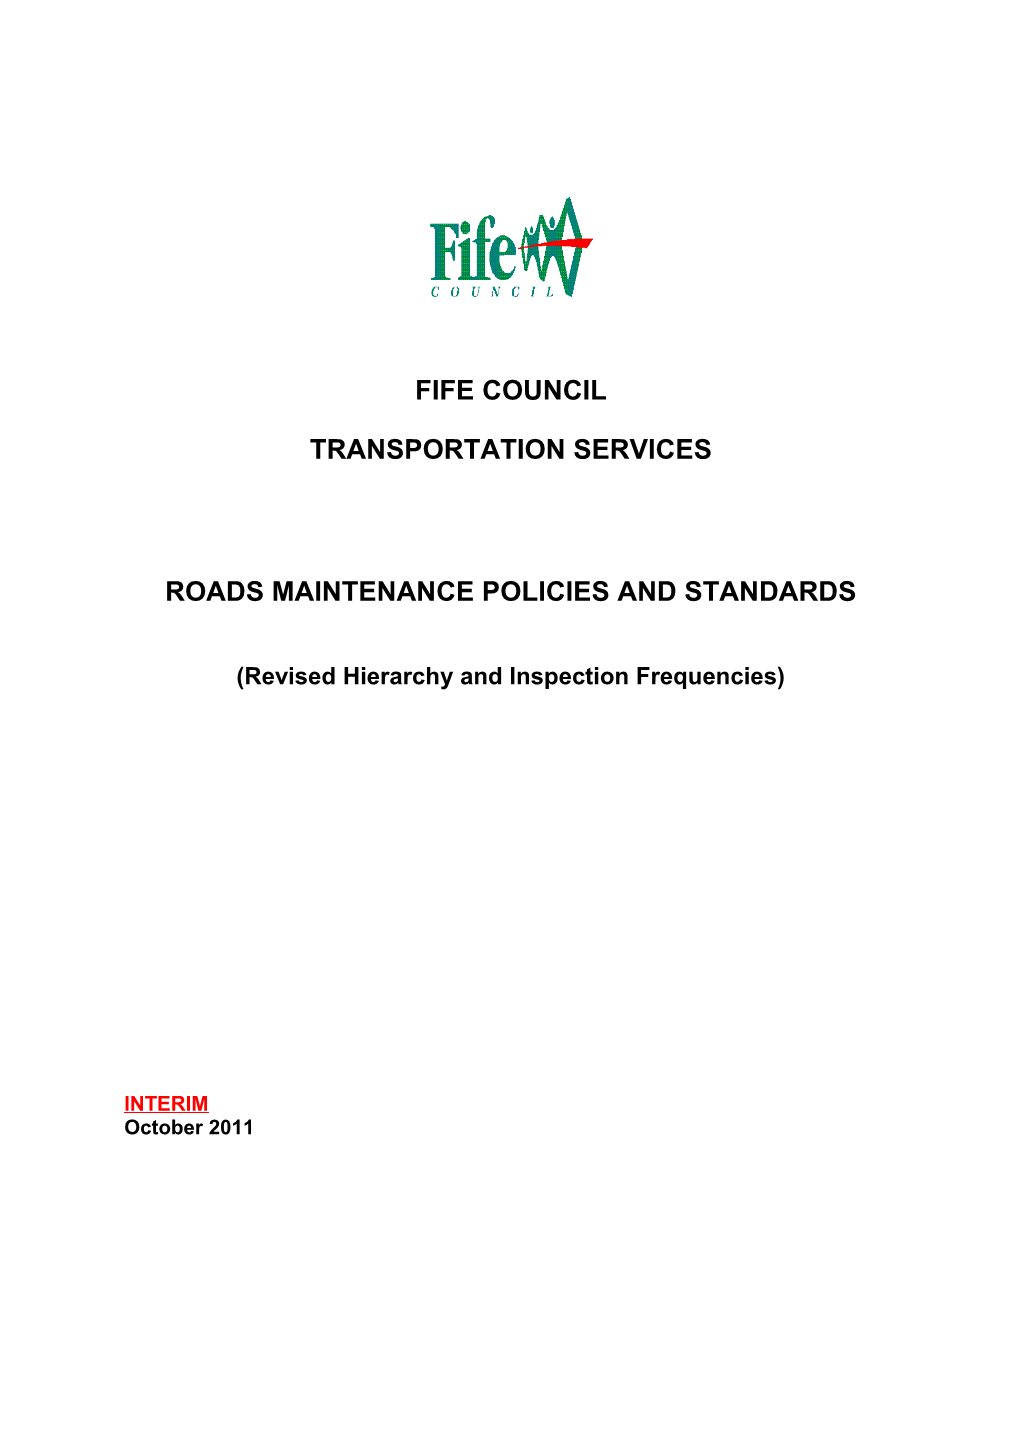 Roads Maintenance Policies and Standards